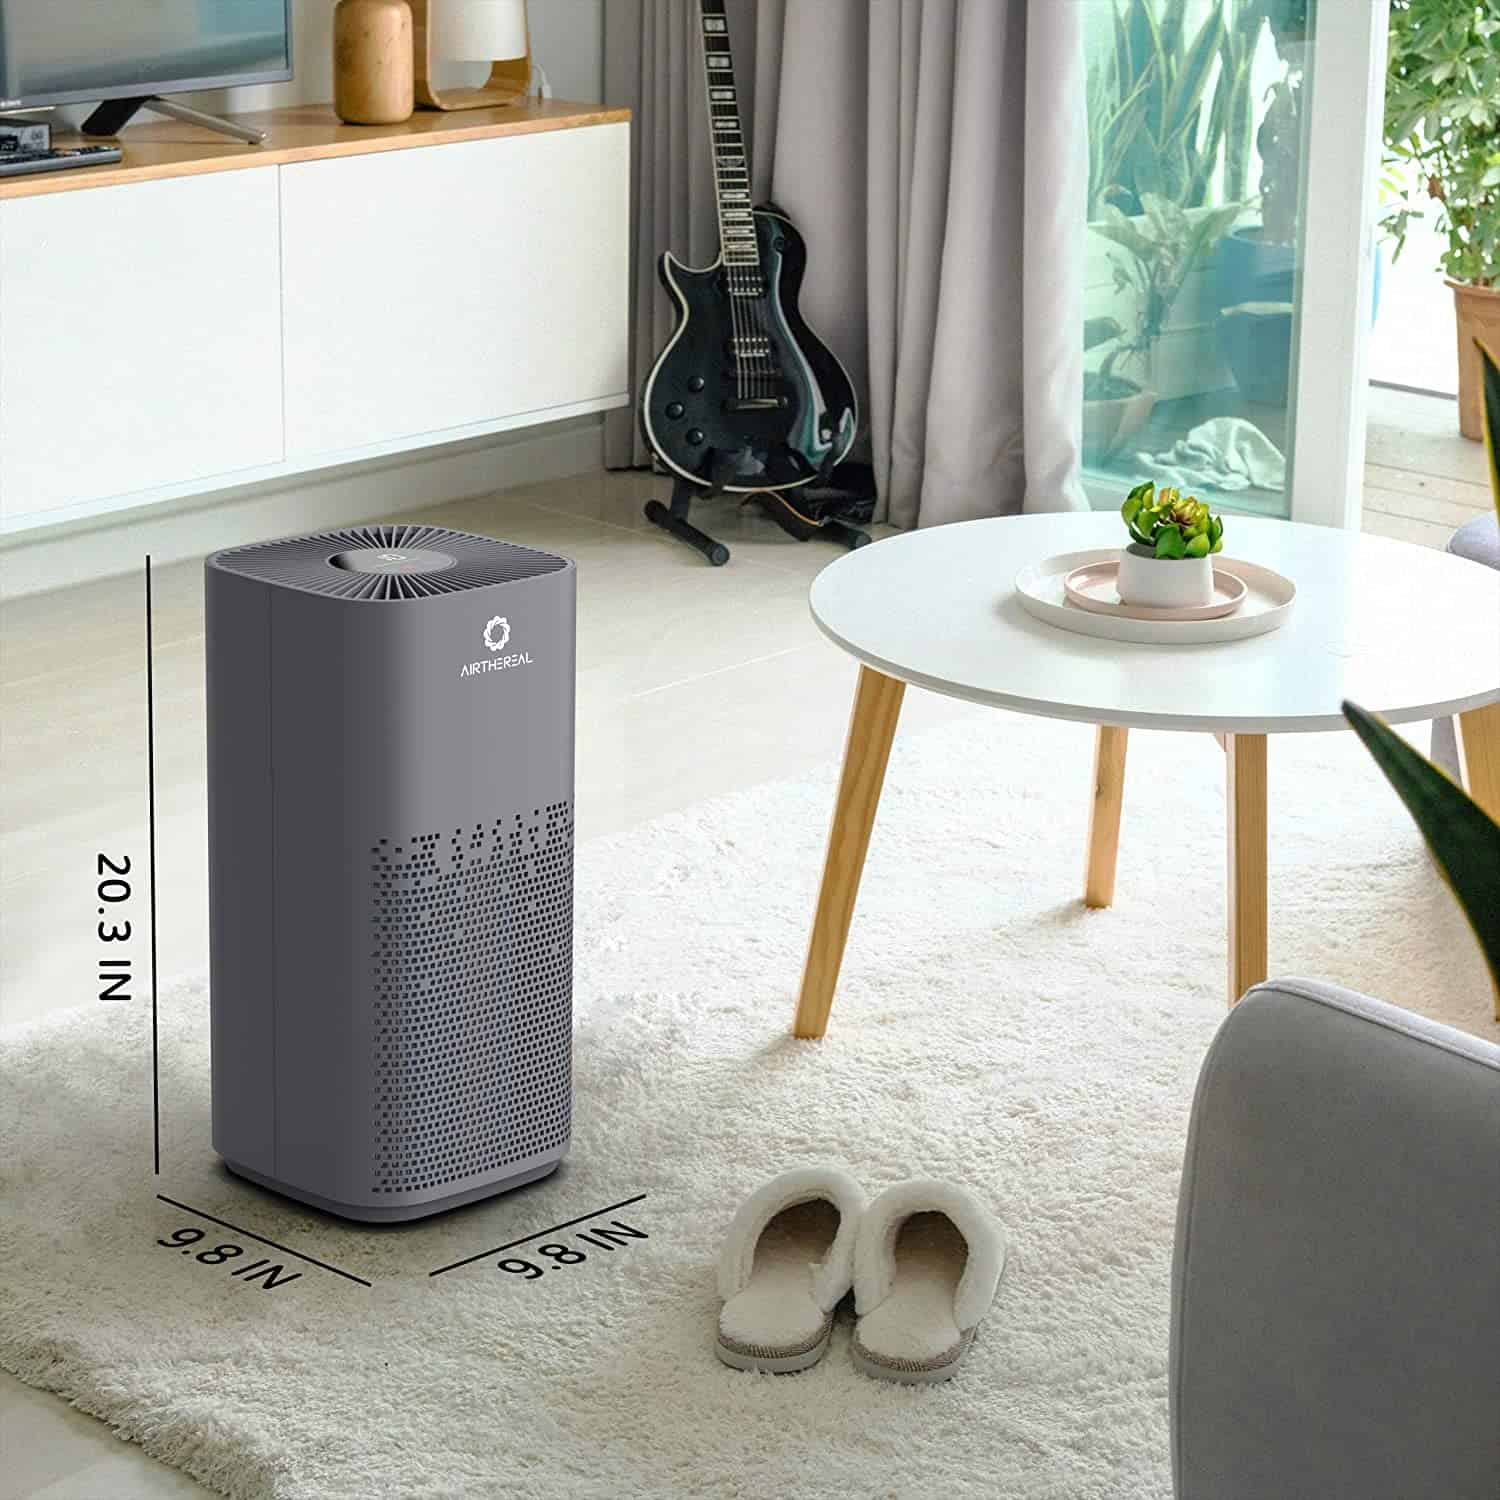 Airthereal AGH380 Air Purifier for 500 square feet